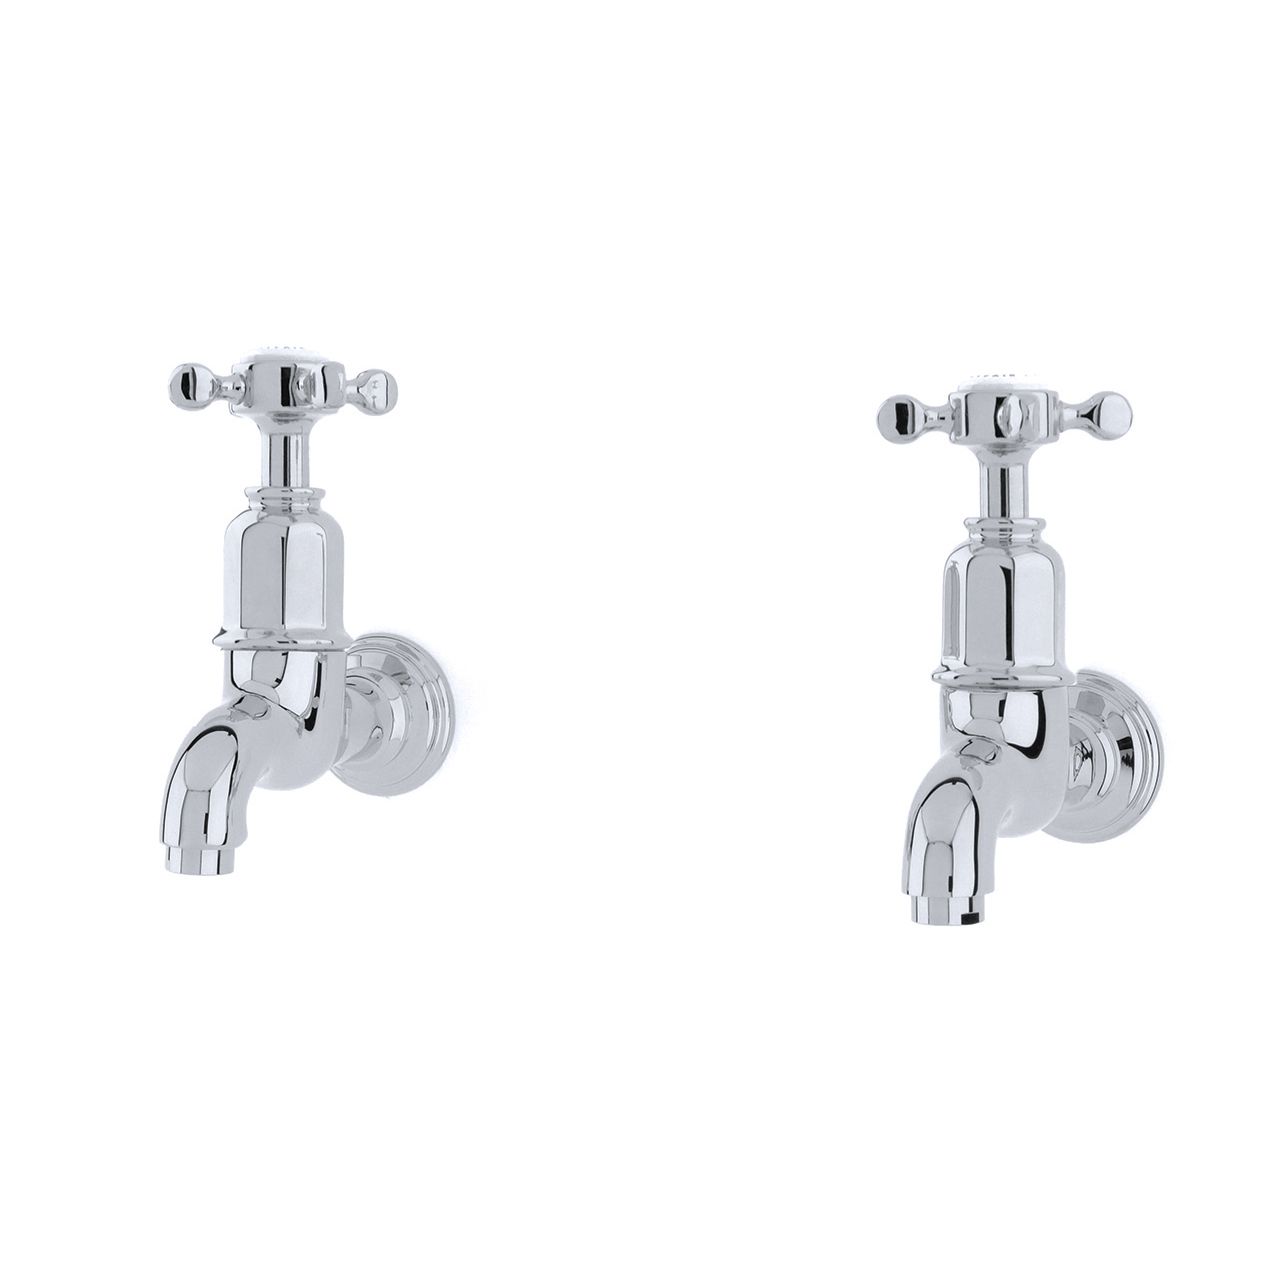 Ionian (Mayan) Wall Mounted Taps with Crosstop Handles in Chrome – Perrin & Rowe